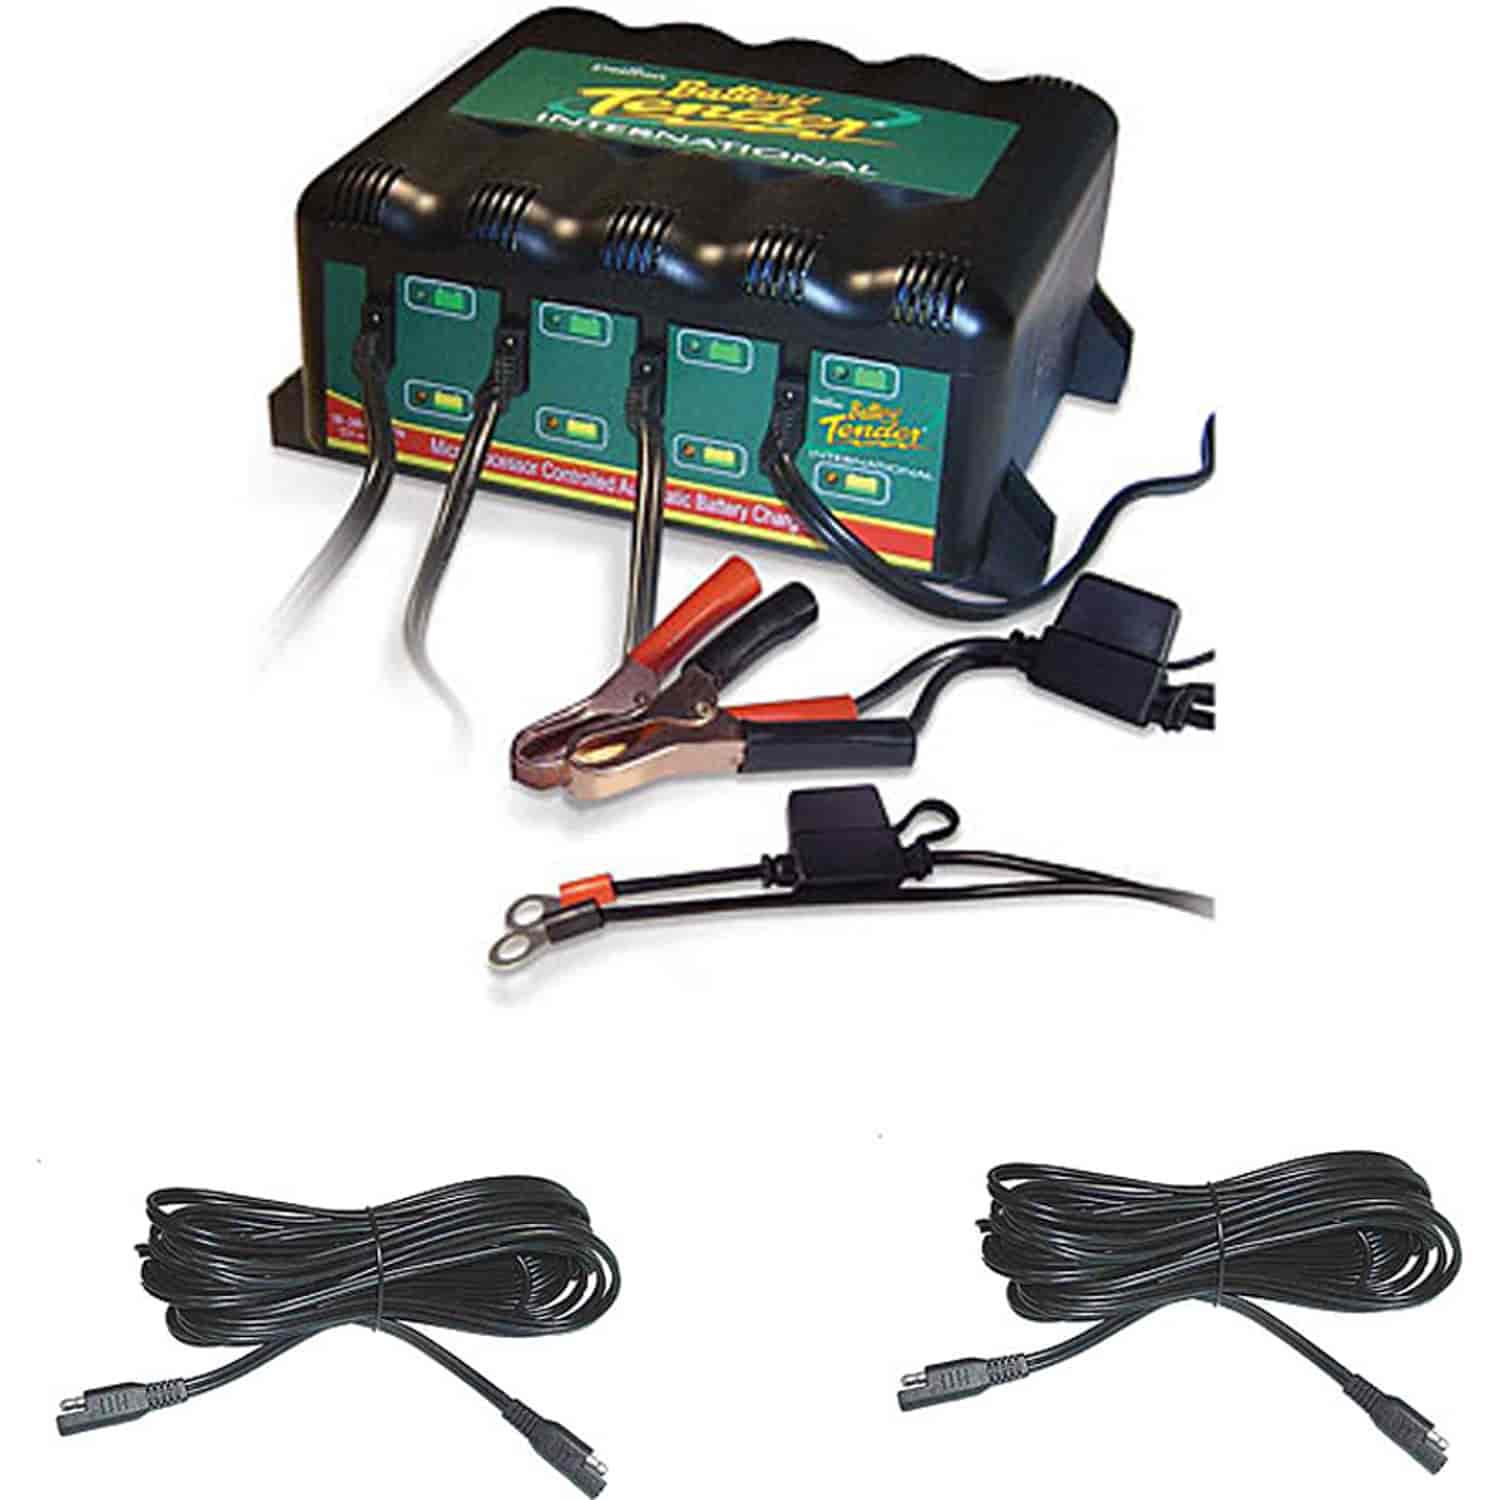 4-Bank Battery Charger and Extension Kit